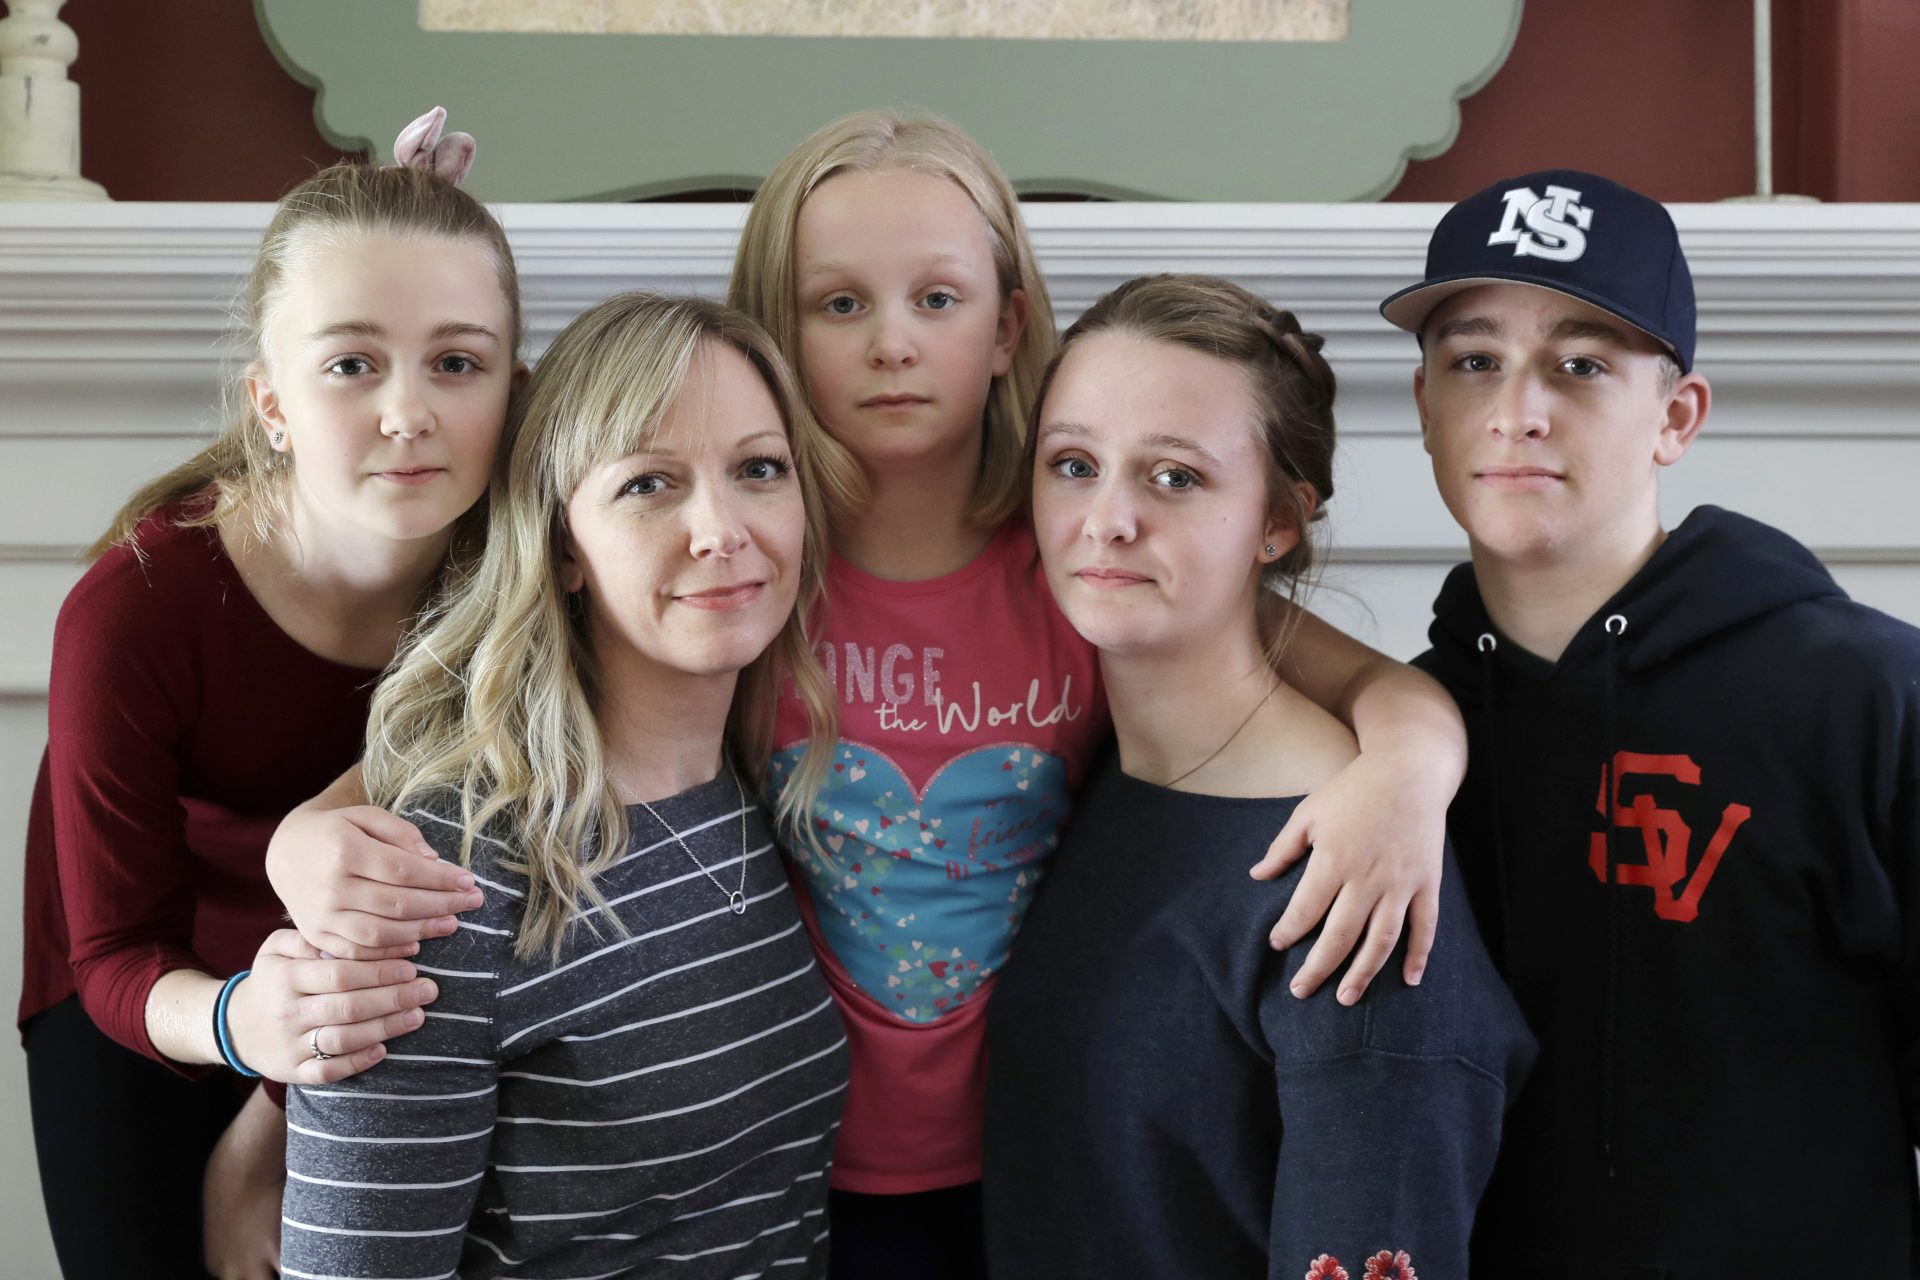 In this Oct. 9, 2019, photo, Donya Grant, second from left, poses for a photo with her children, Rowyn, 11, left, Mabry, 8, center, Hadley, 16, second from right, and Kemper, 14, right, in their home in Monroe, Wash. The family joined a lawsuit against the Monroe School District and others, alleging that the district failed to adequately respond to PCBs, or polychlorinated biphenyls, at the Sky Valley Education Center, a K-12 public school. Grant has homeschooled her children since they left Sky Valley in 2016 for health reasons that they believe were related to the toxic chemicals.